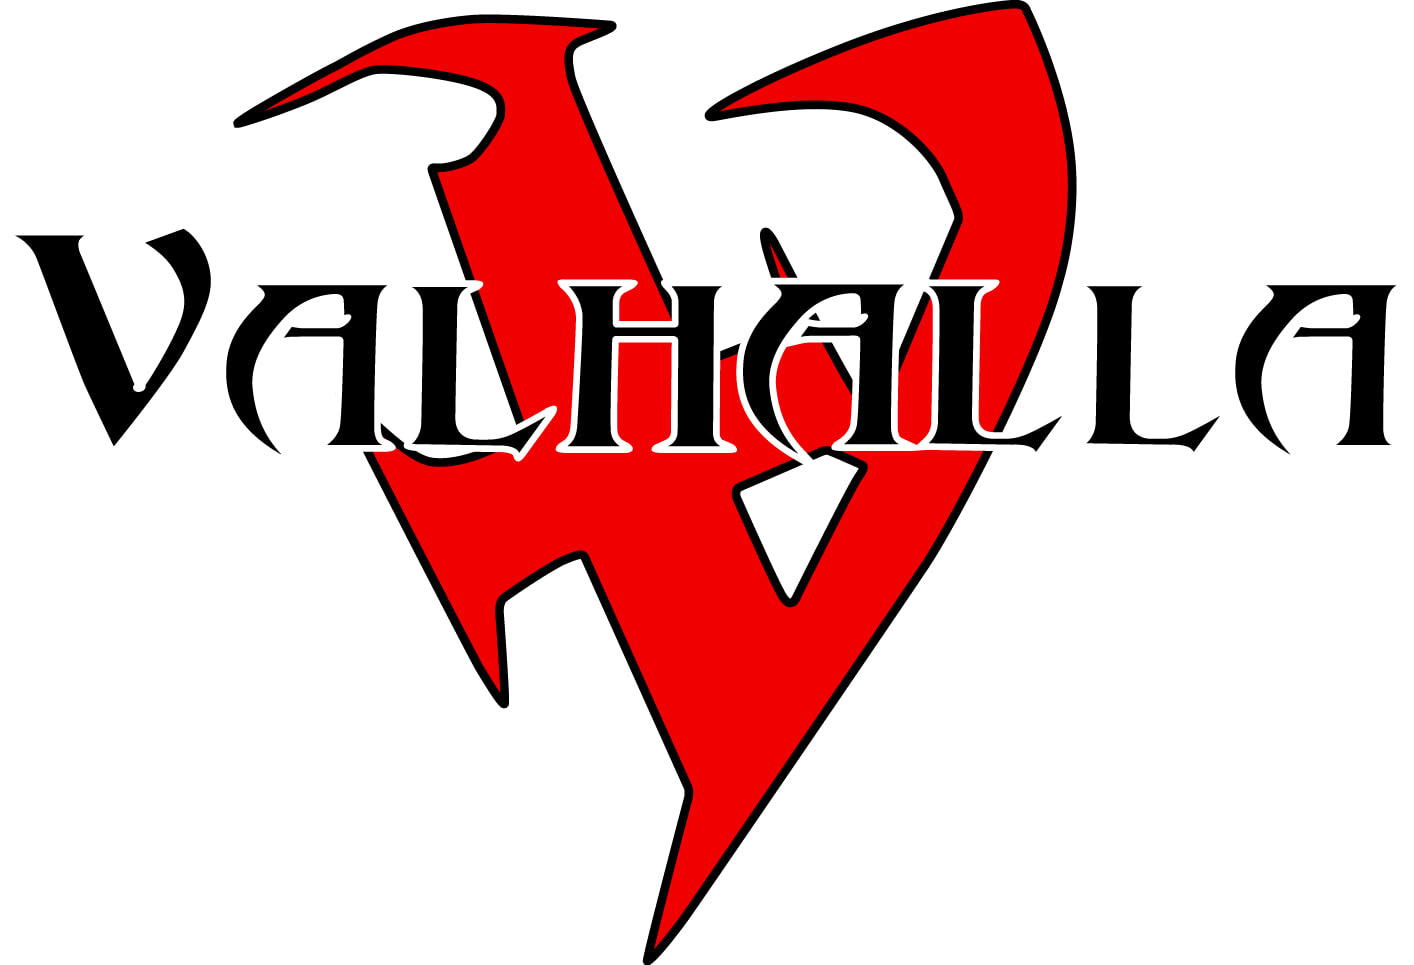 Valhalla Martial Arts Kickboxing and Fitness